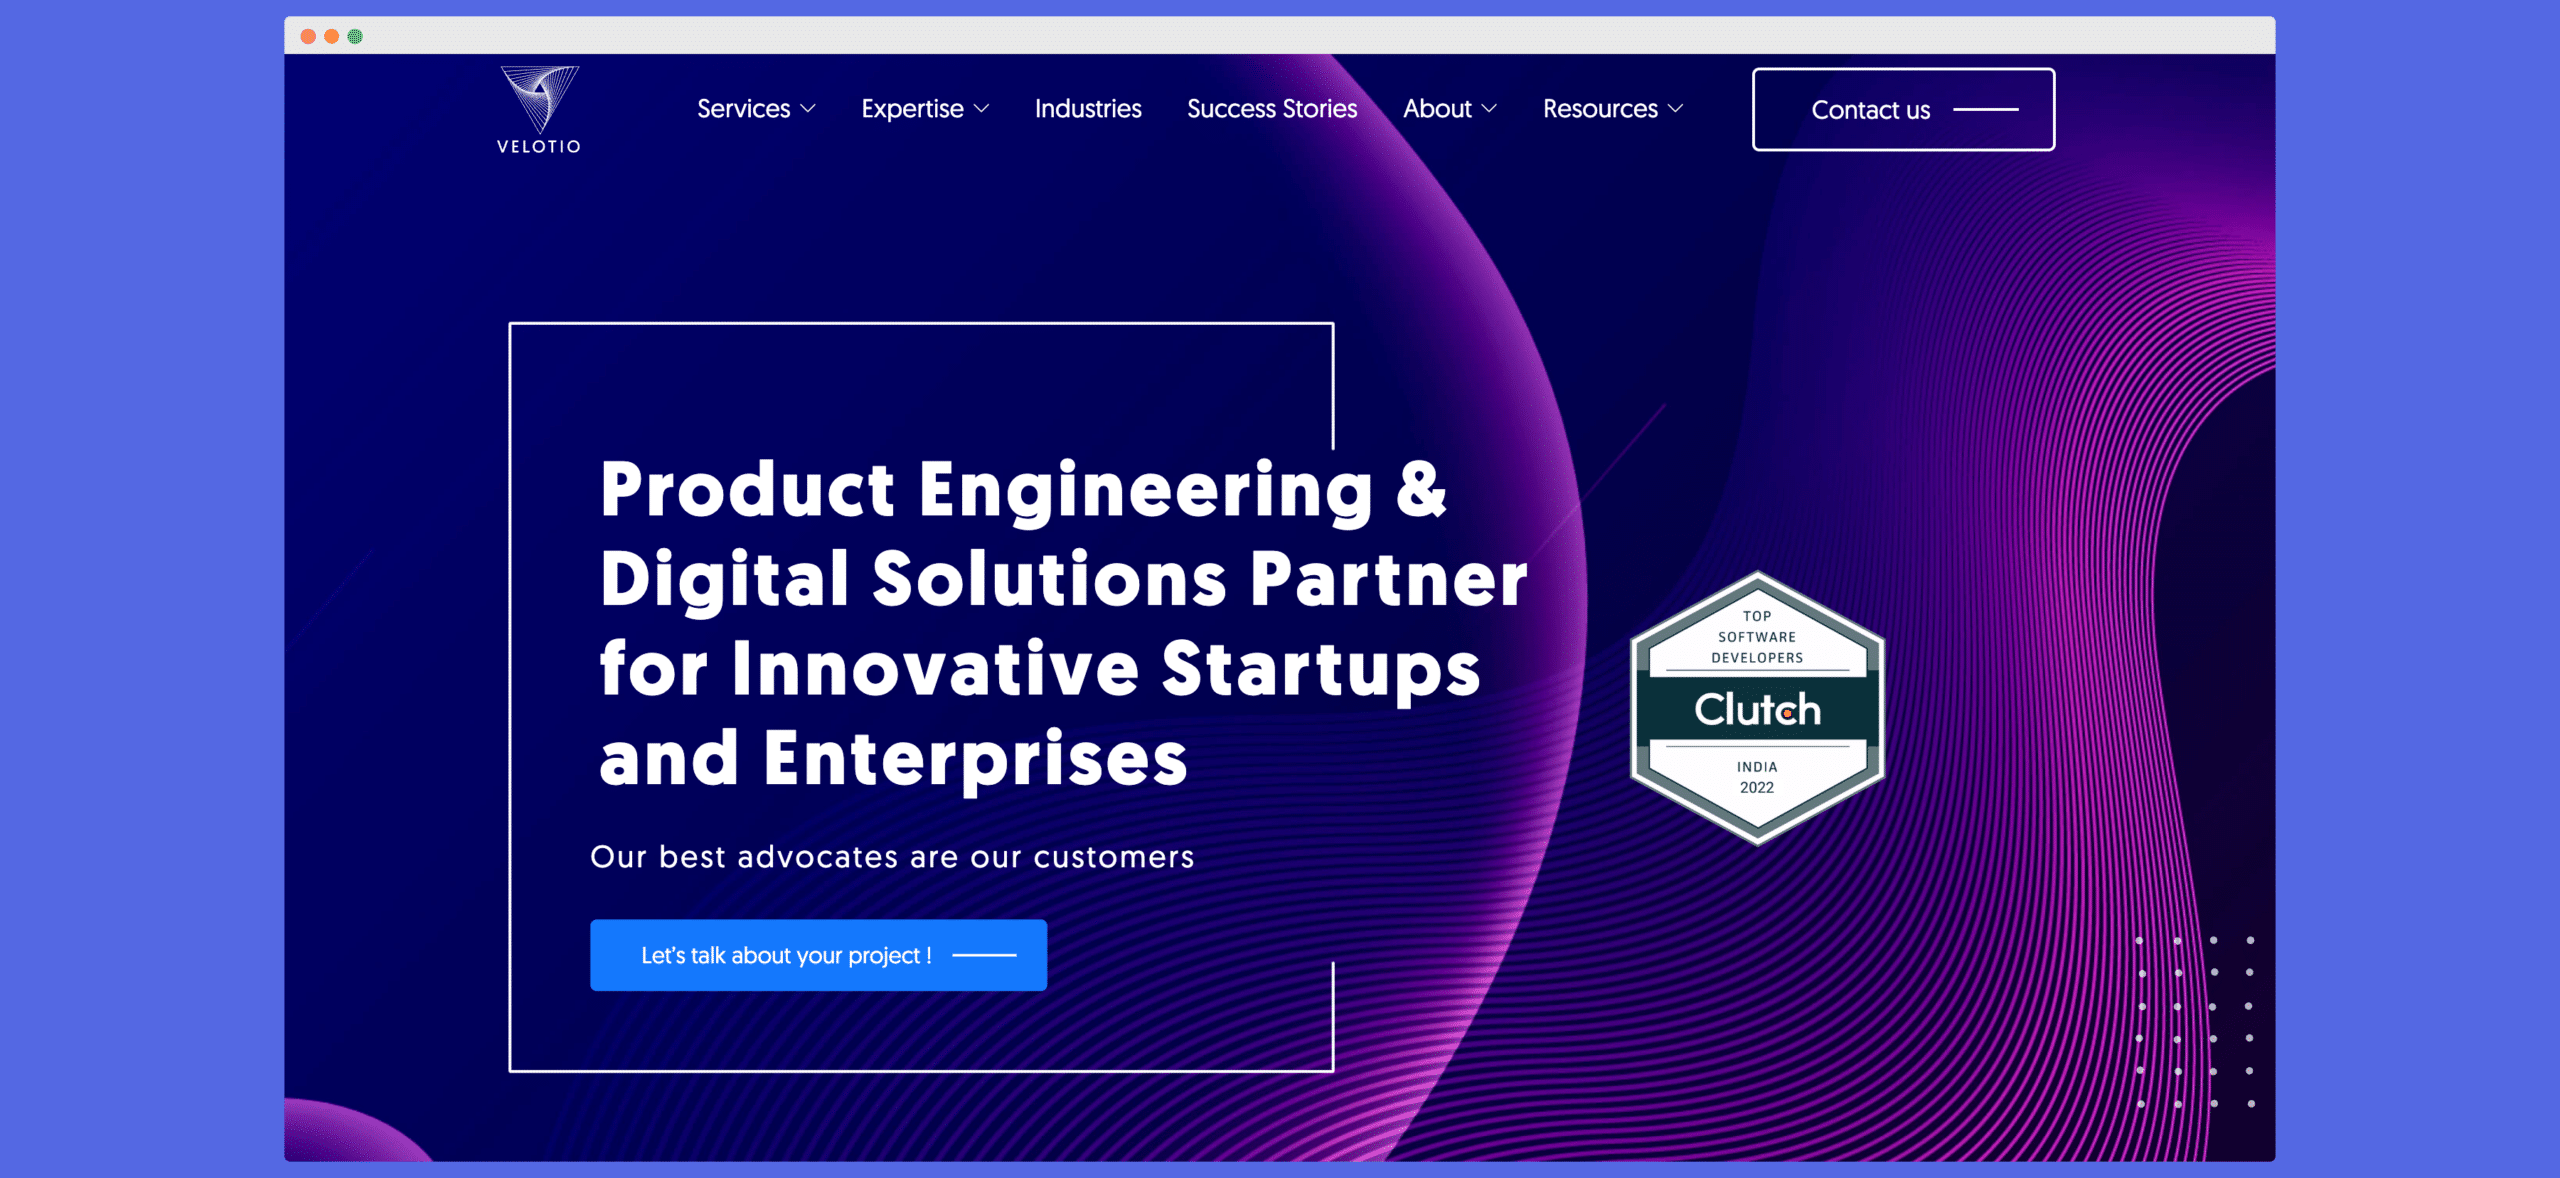 velotio - product engineering and digital solutions provider website